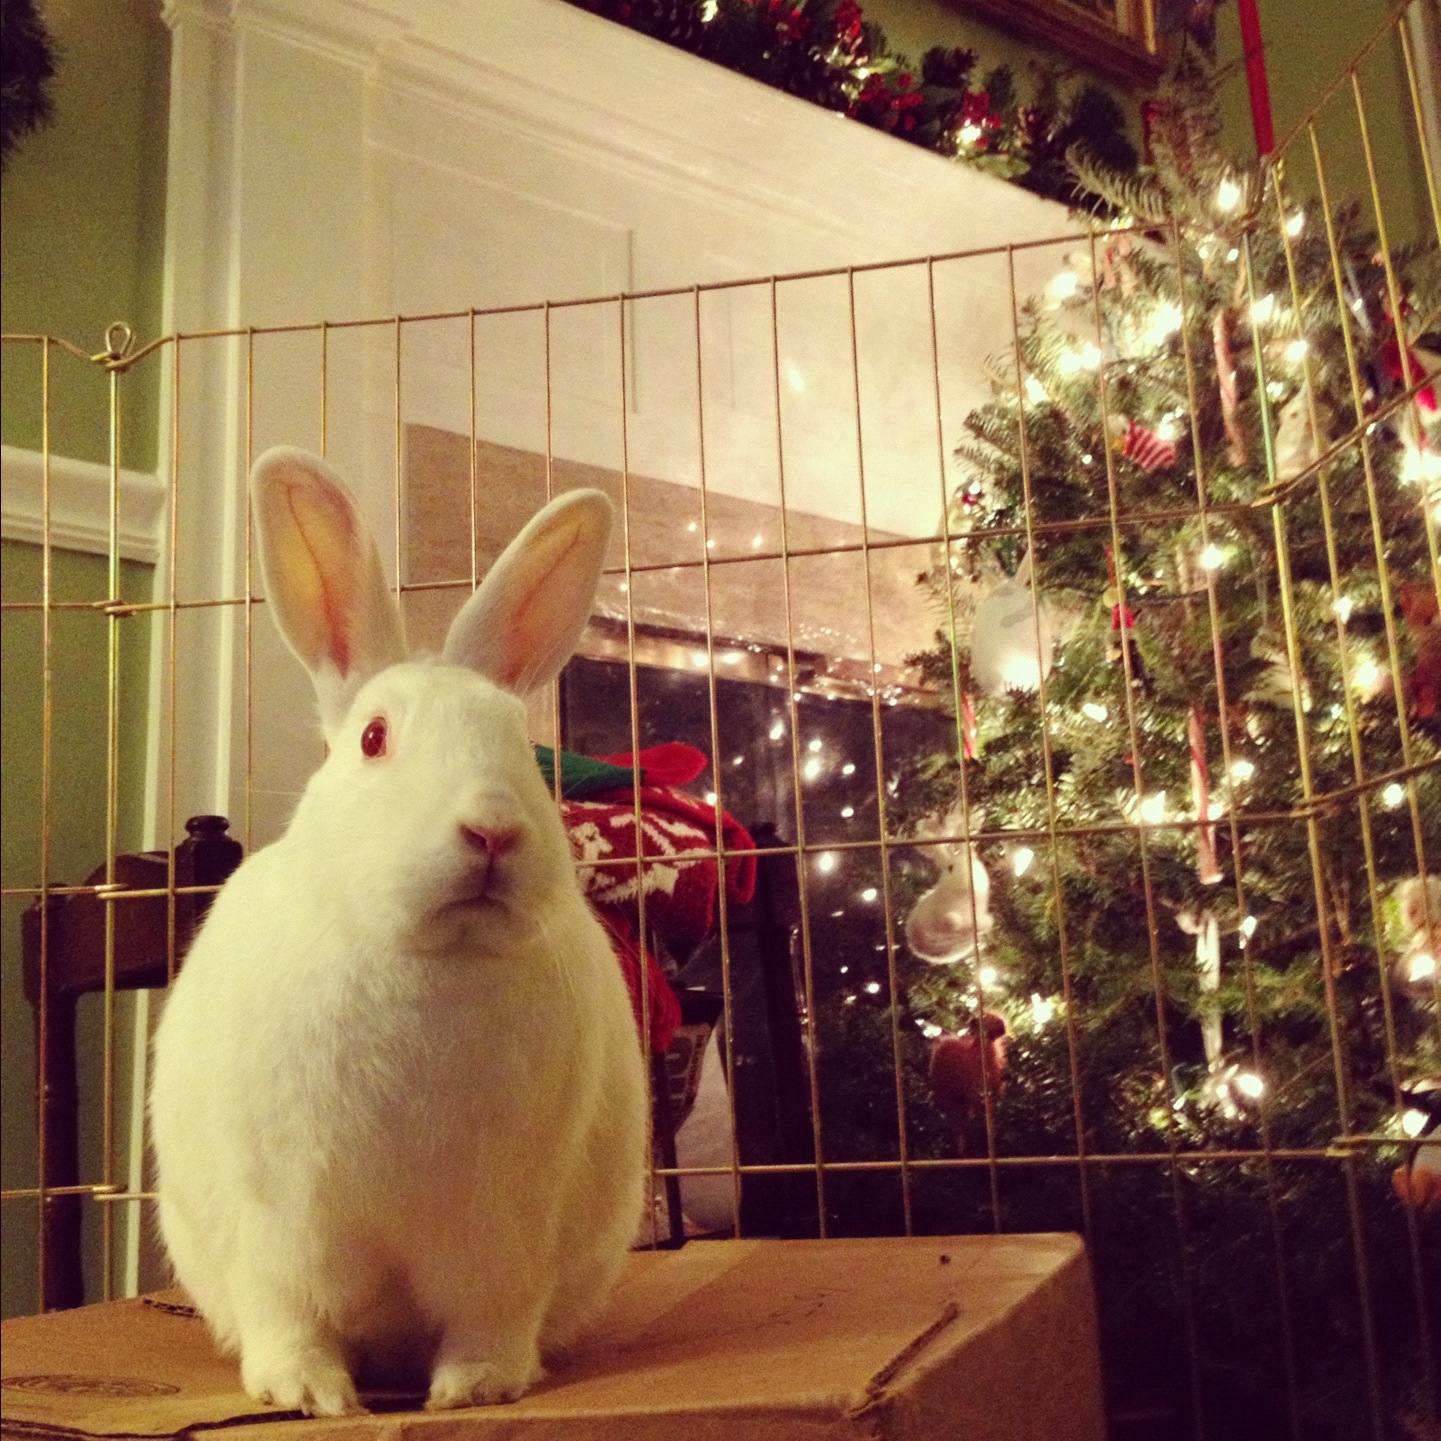 Bunny Disapproves of the Tree and Would Like to Redecorate It Her Own Way